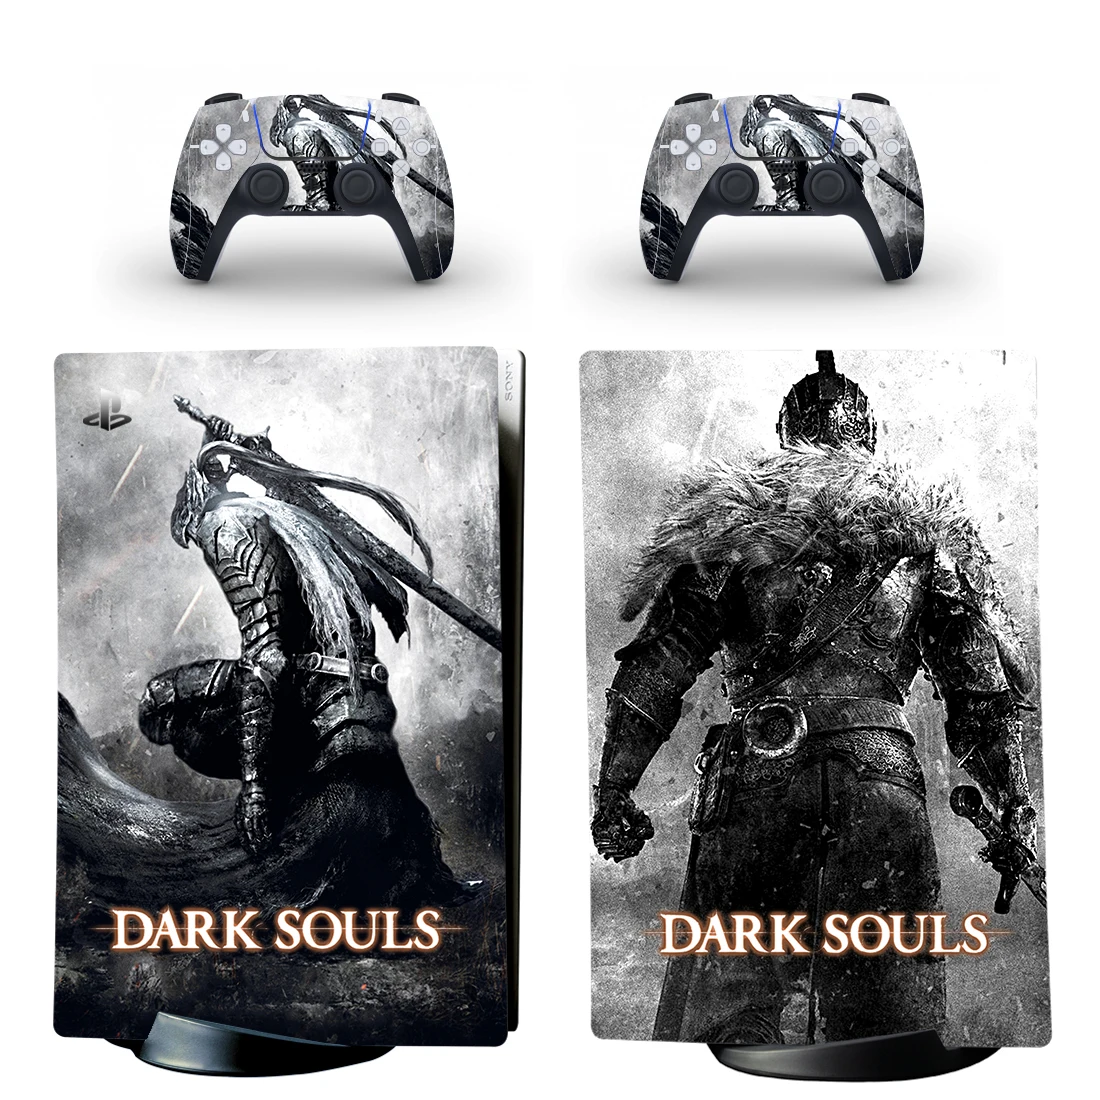 

Dark Souls PS5 Digital Edition Skin Sticker Decal Cover for PlayStation 5 Console and 2 Controllers PS5 Skin Sticker Vinyl